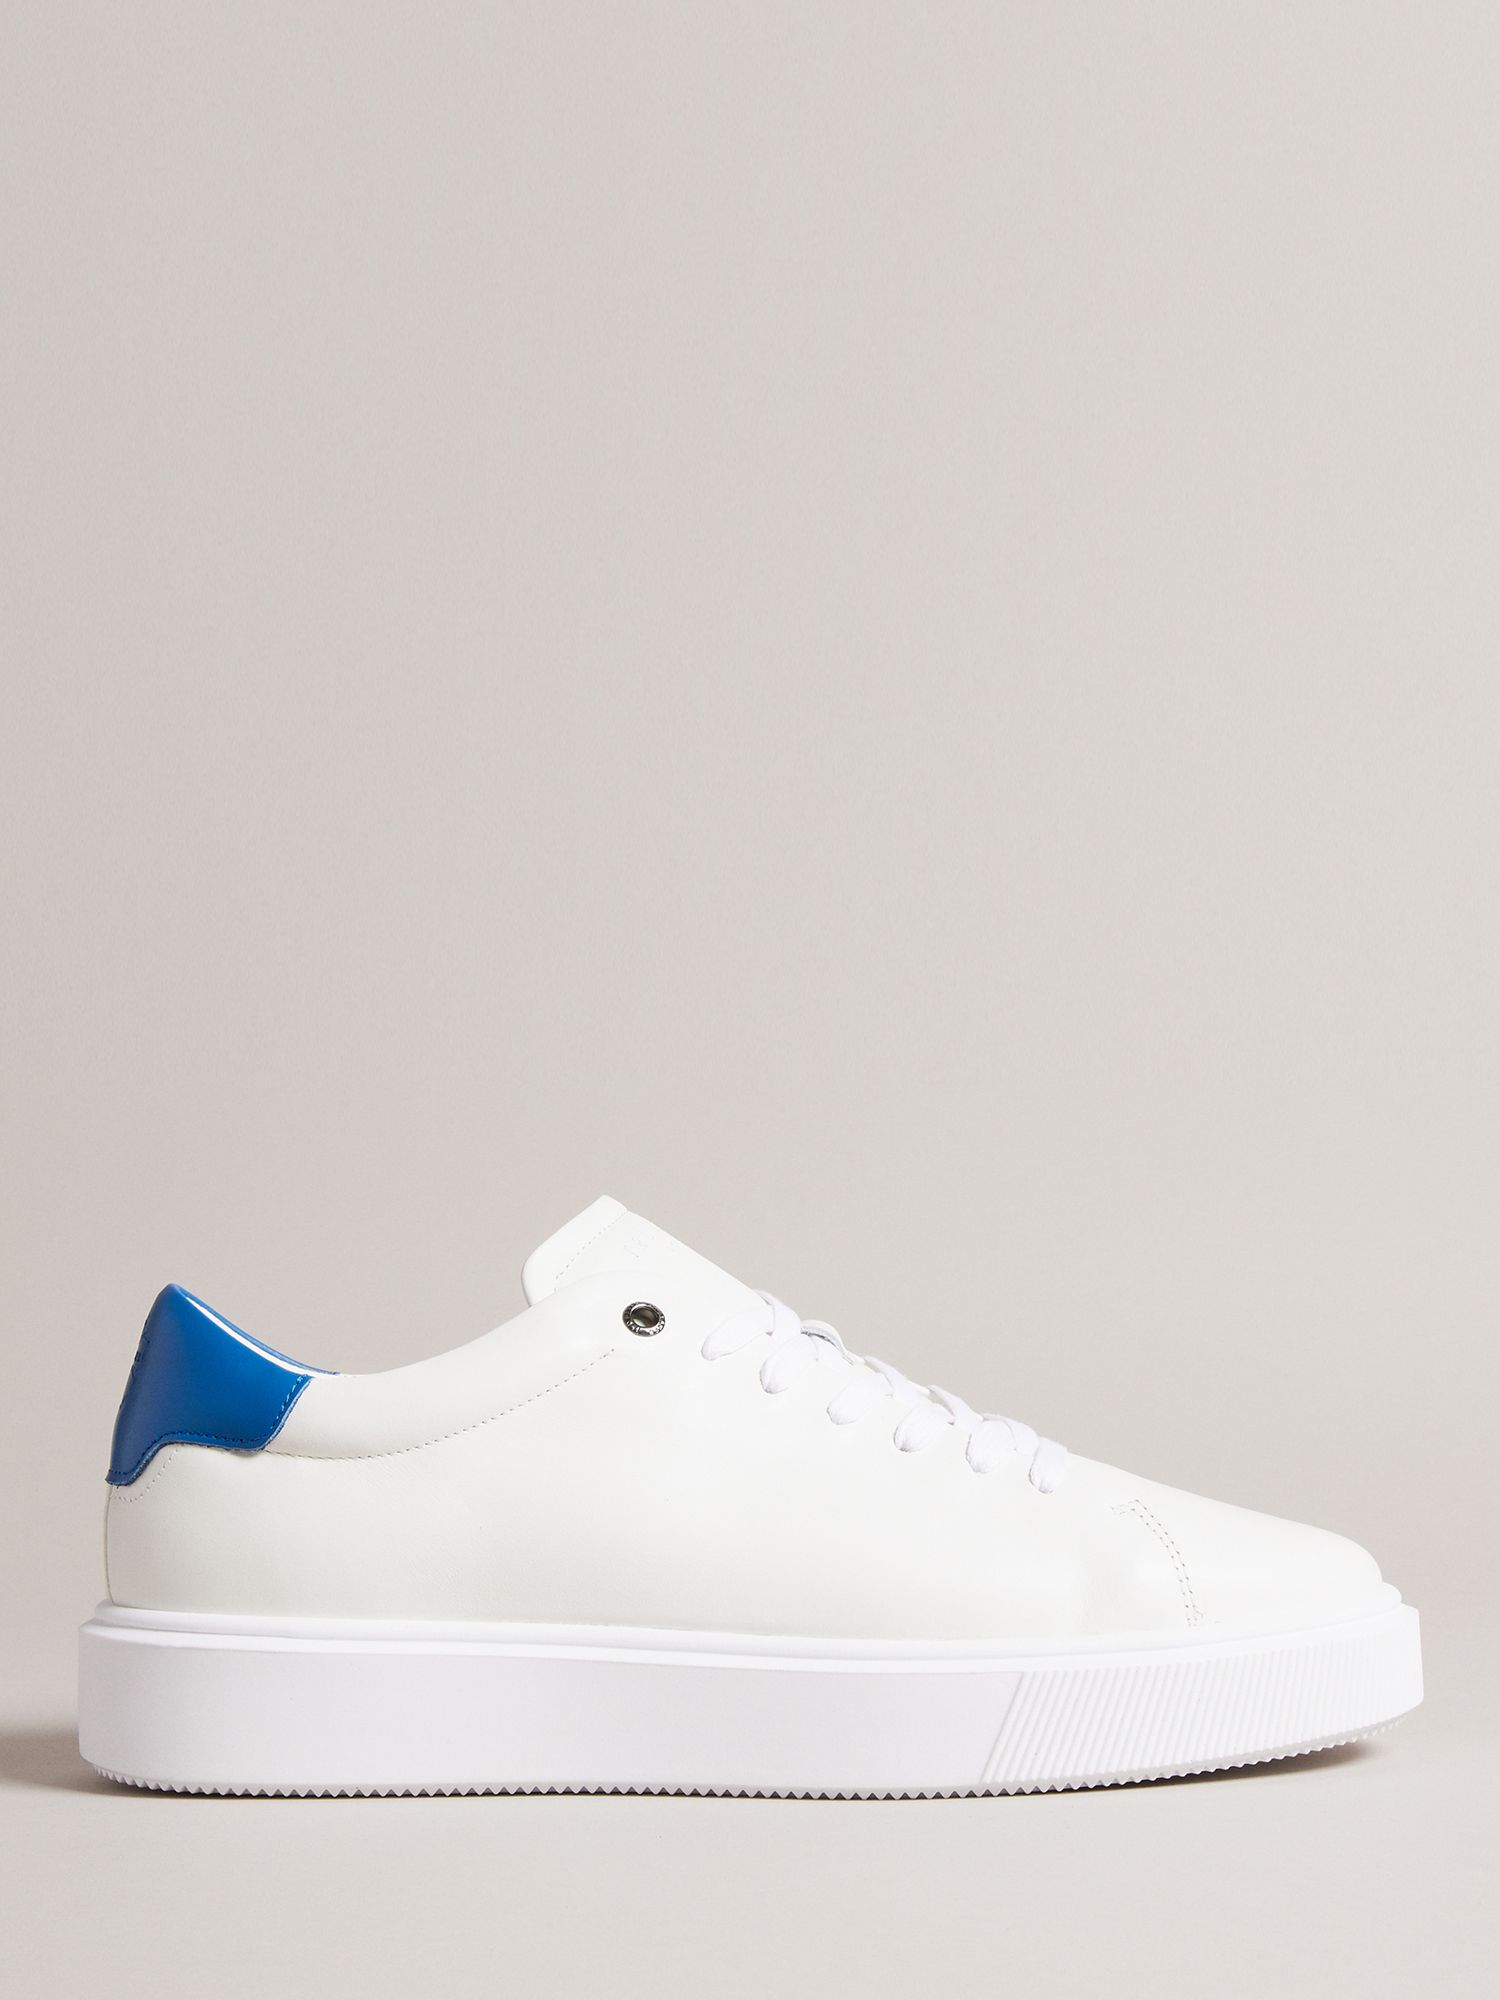 Ted Baker Breyon Leather Trainers, White/Blue at John Lewis & Partners